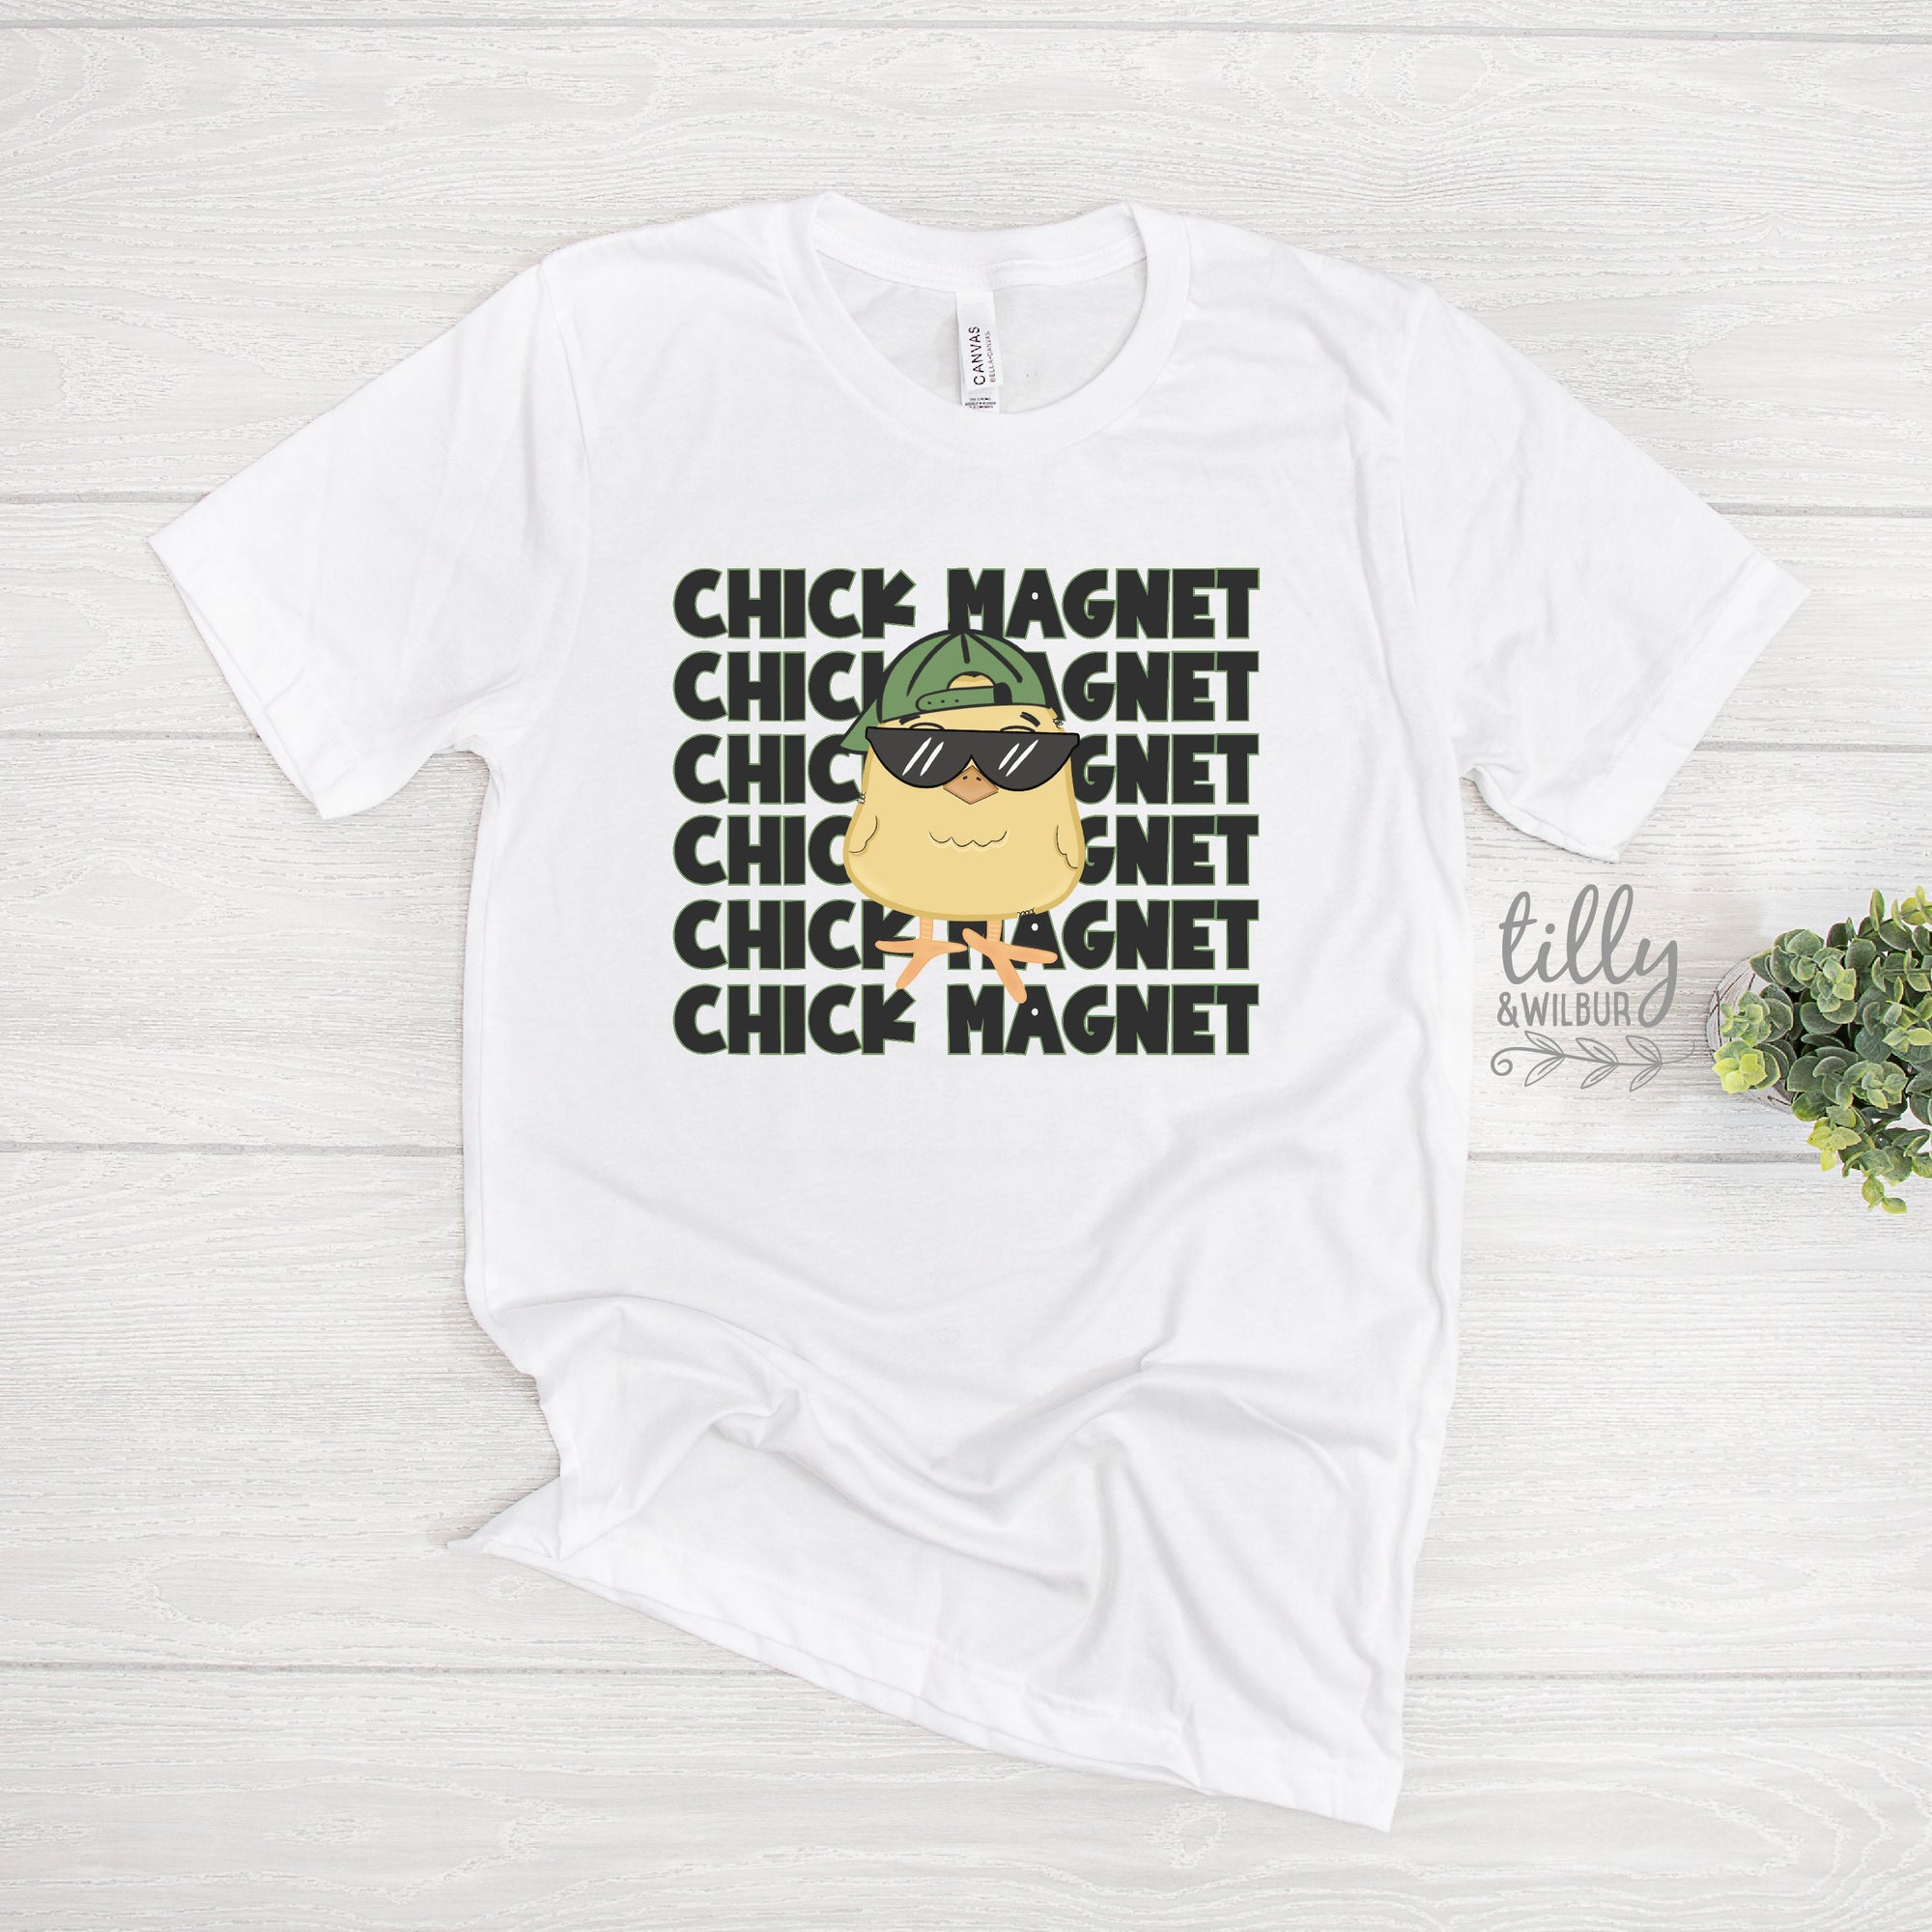 Chick Magnet Easter T-Shirt, Funny Easter T-Shirt, Rabbit T-Shirt, Funny Easter Gift, Hip Hop Easter Clothing, Bad Bunny T-Shirt, Mens Shirt